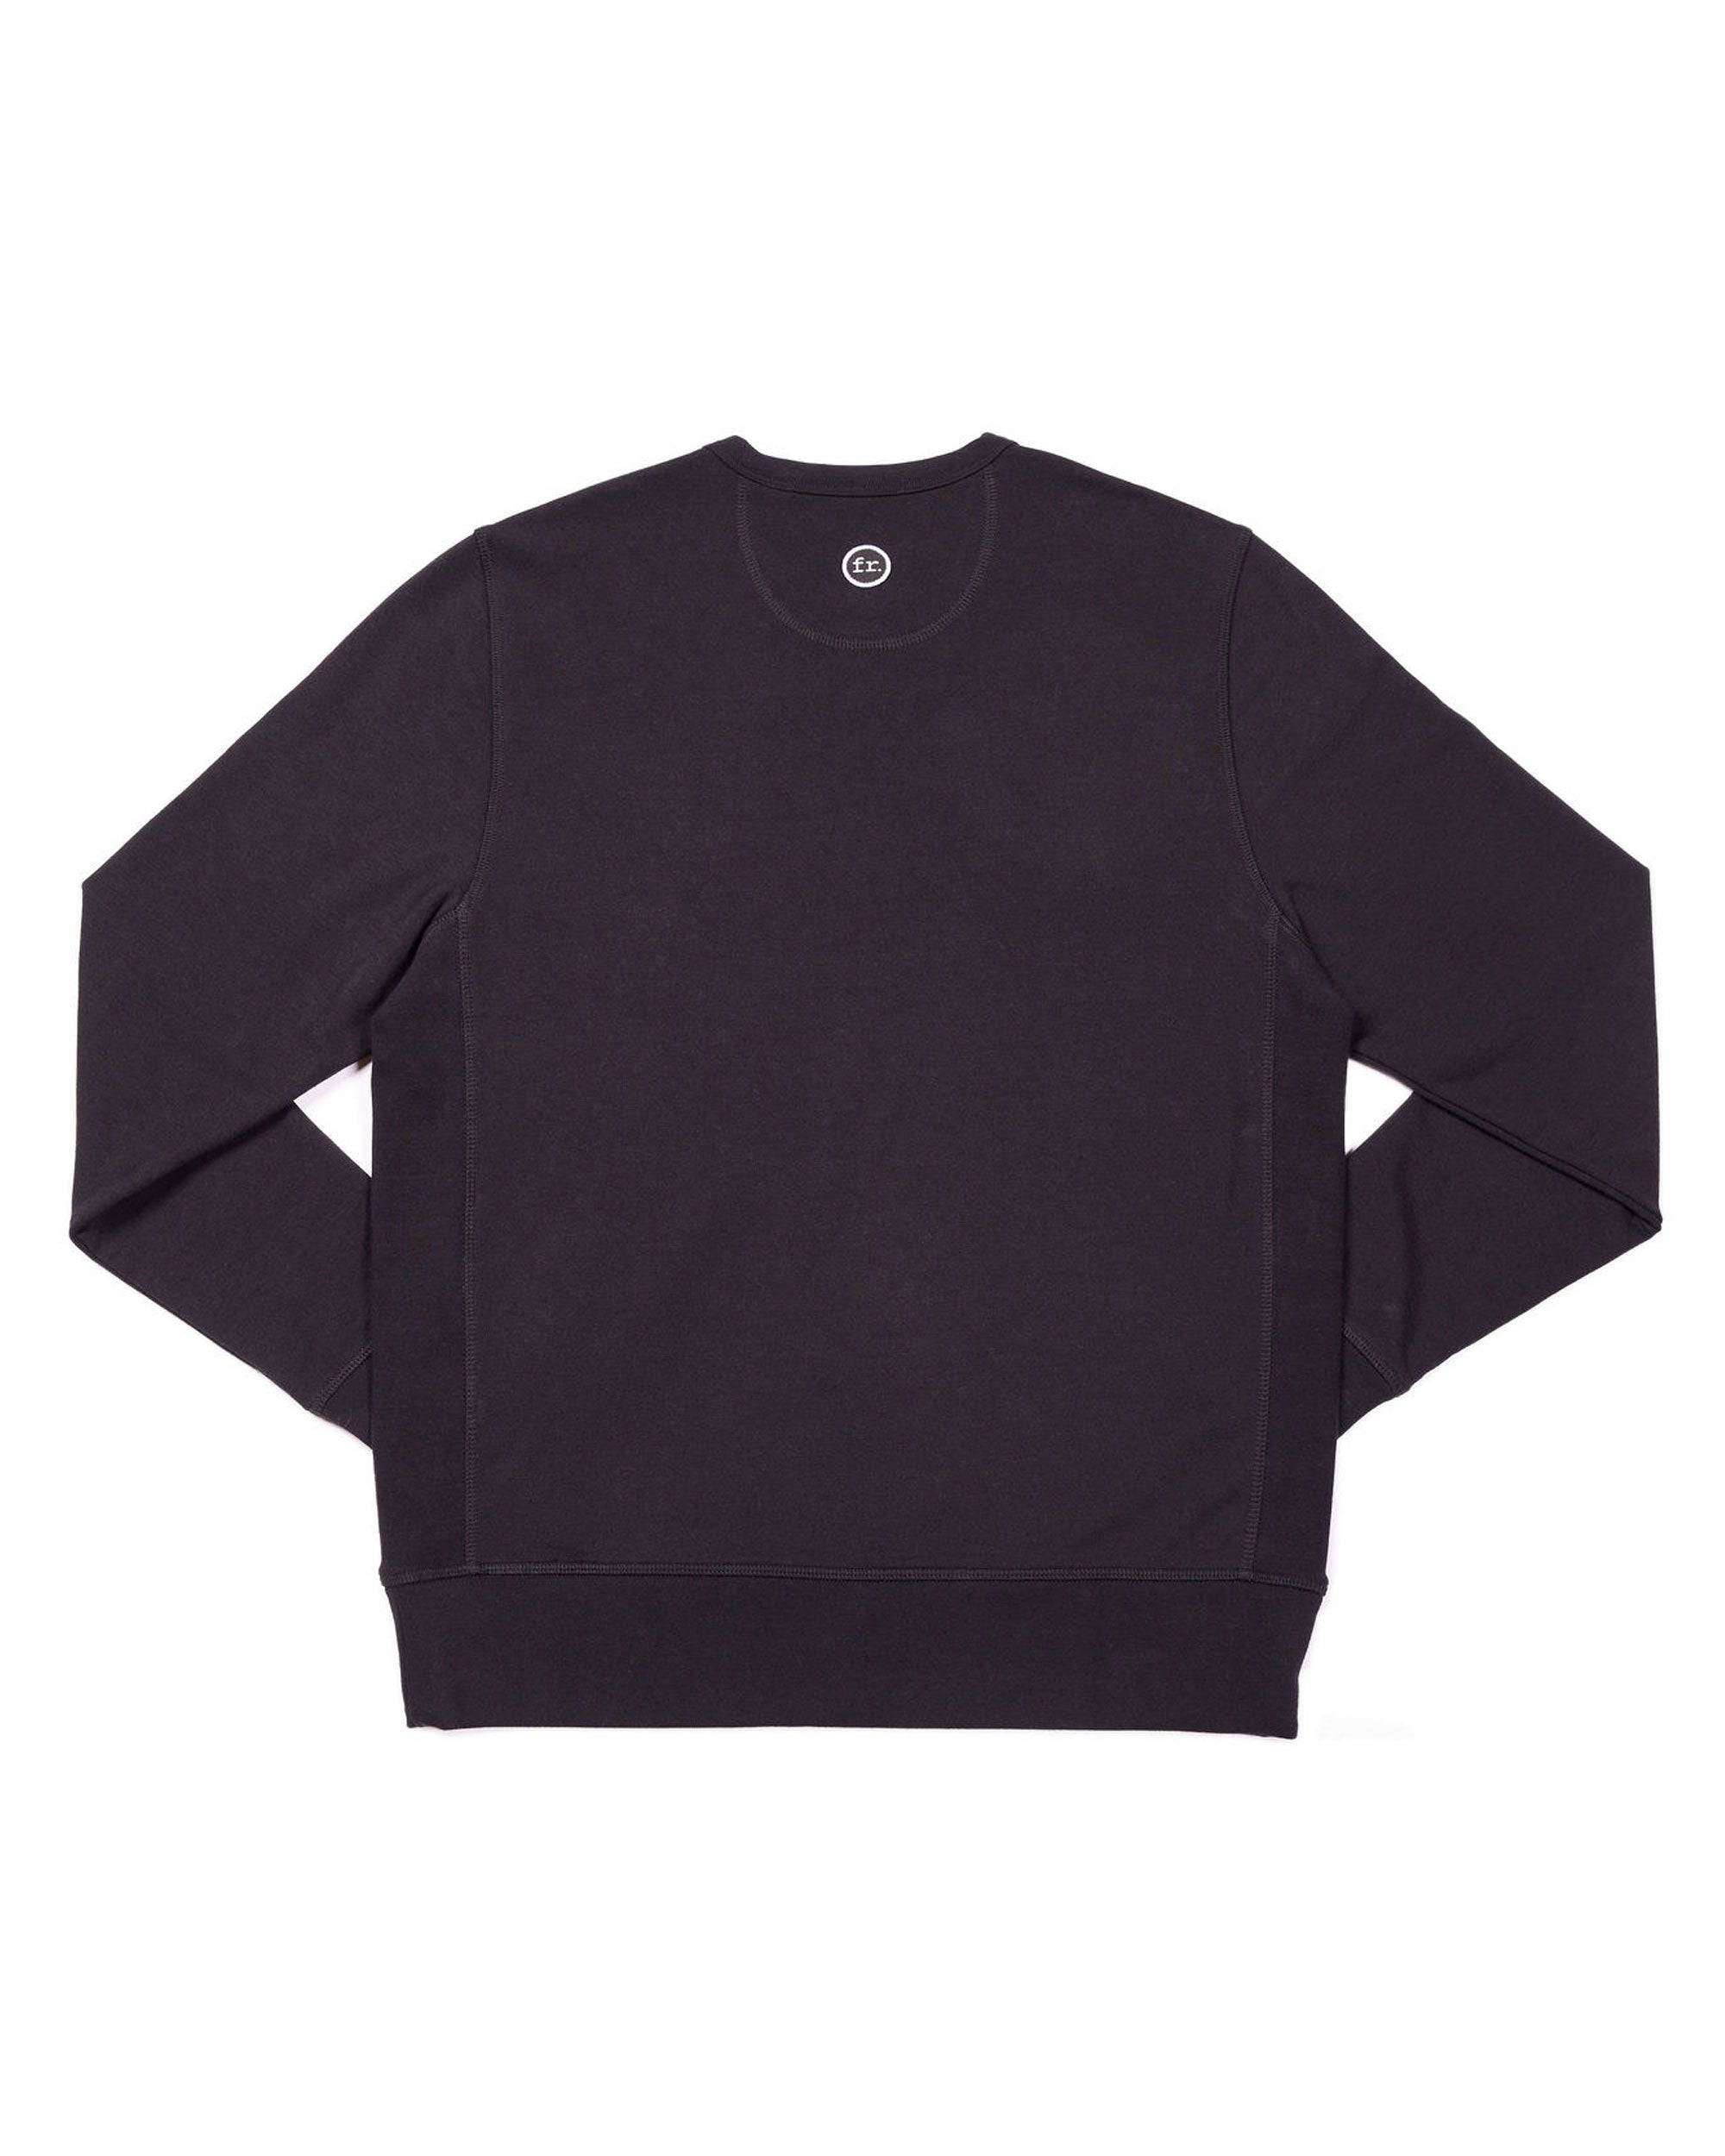 Solace Crewneck Black - Foreign Rider Co.